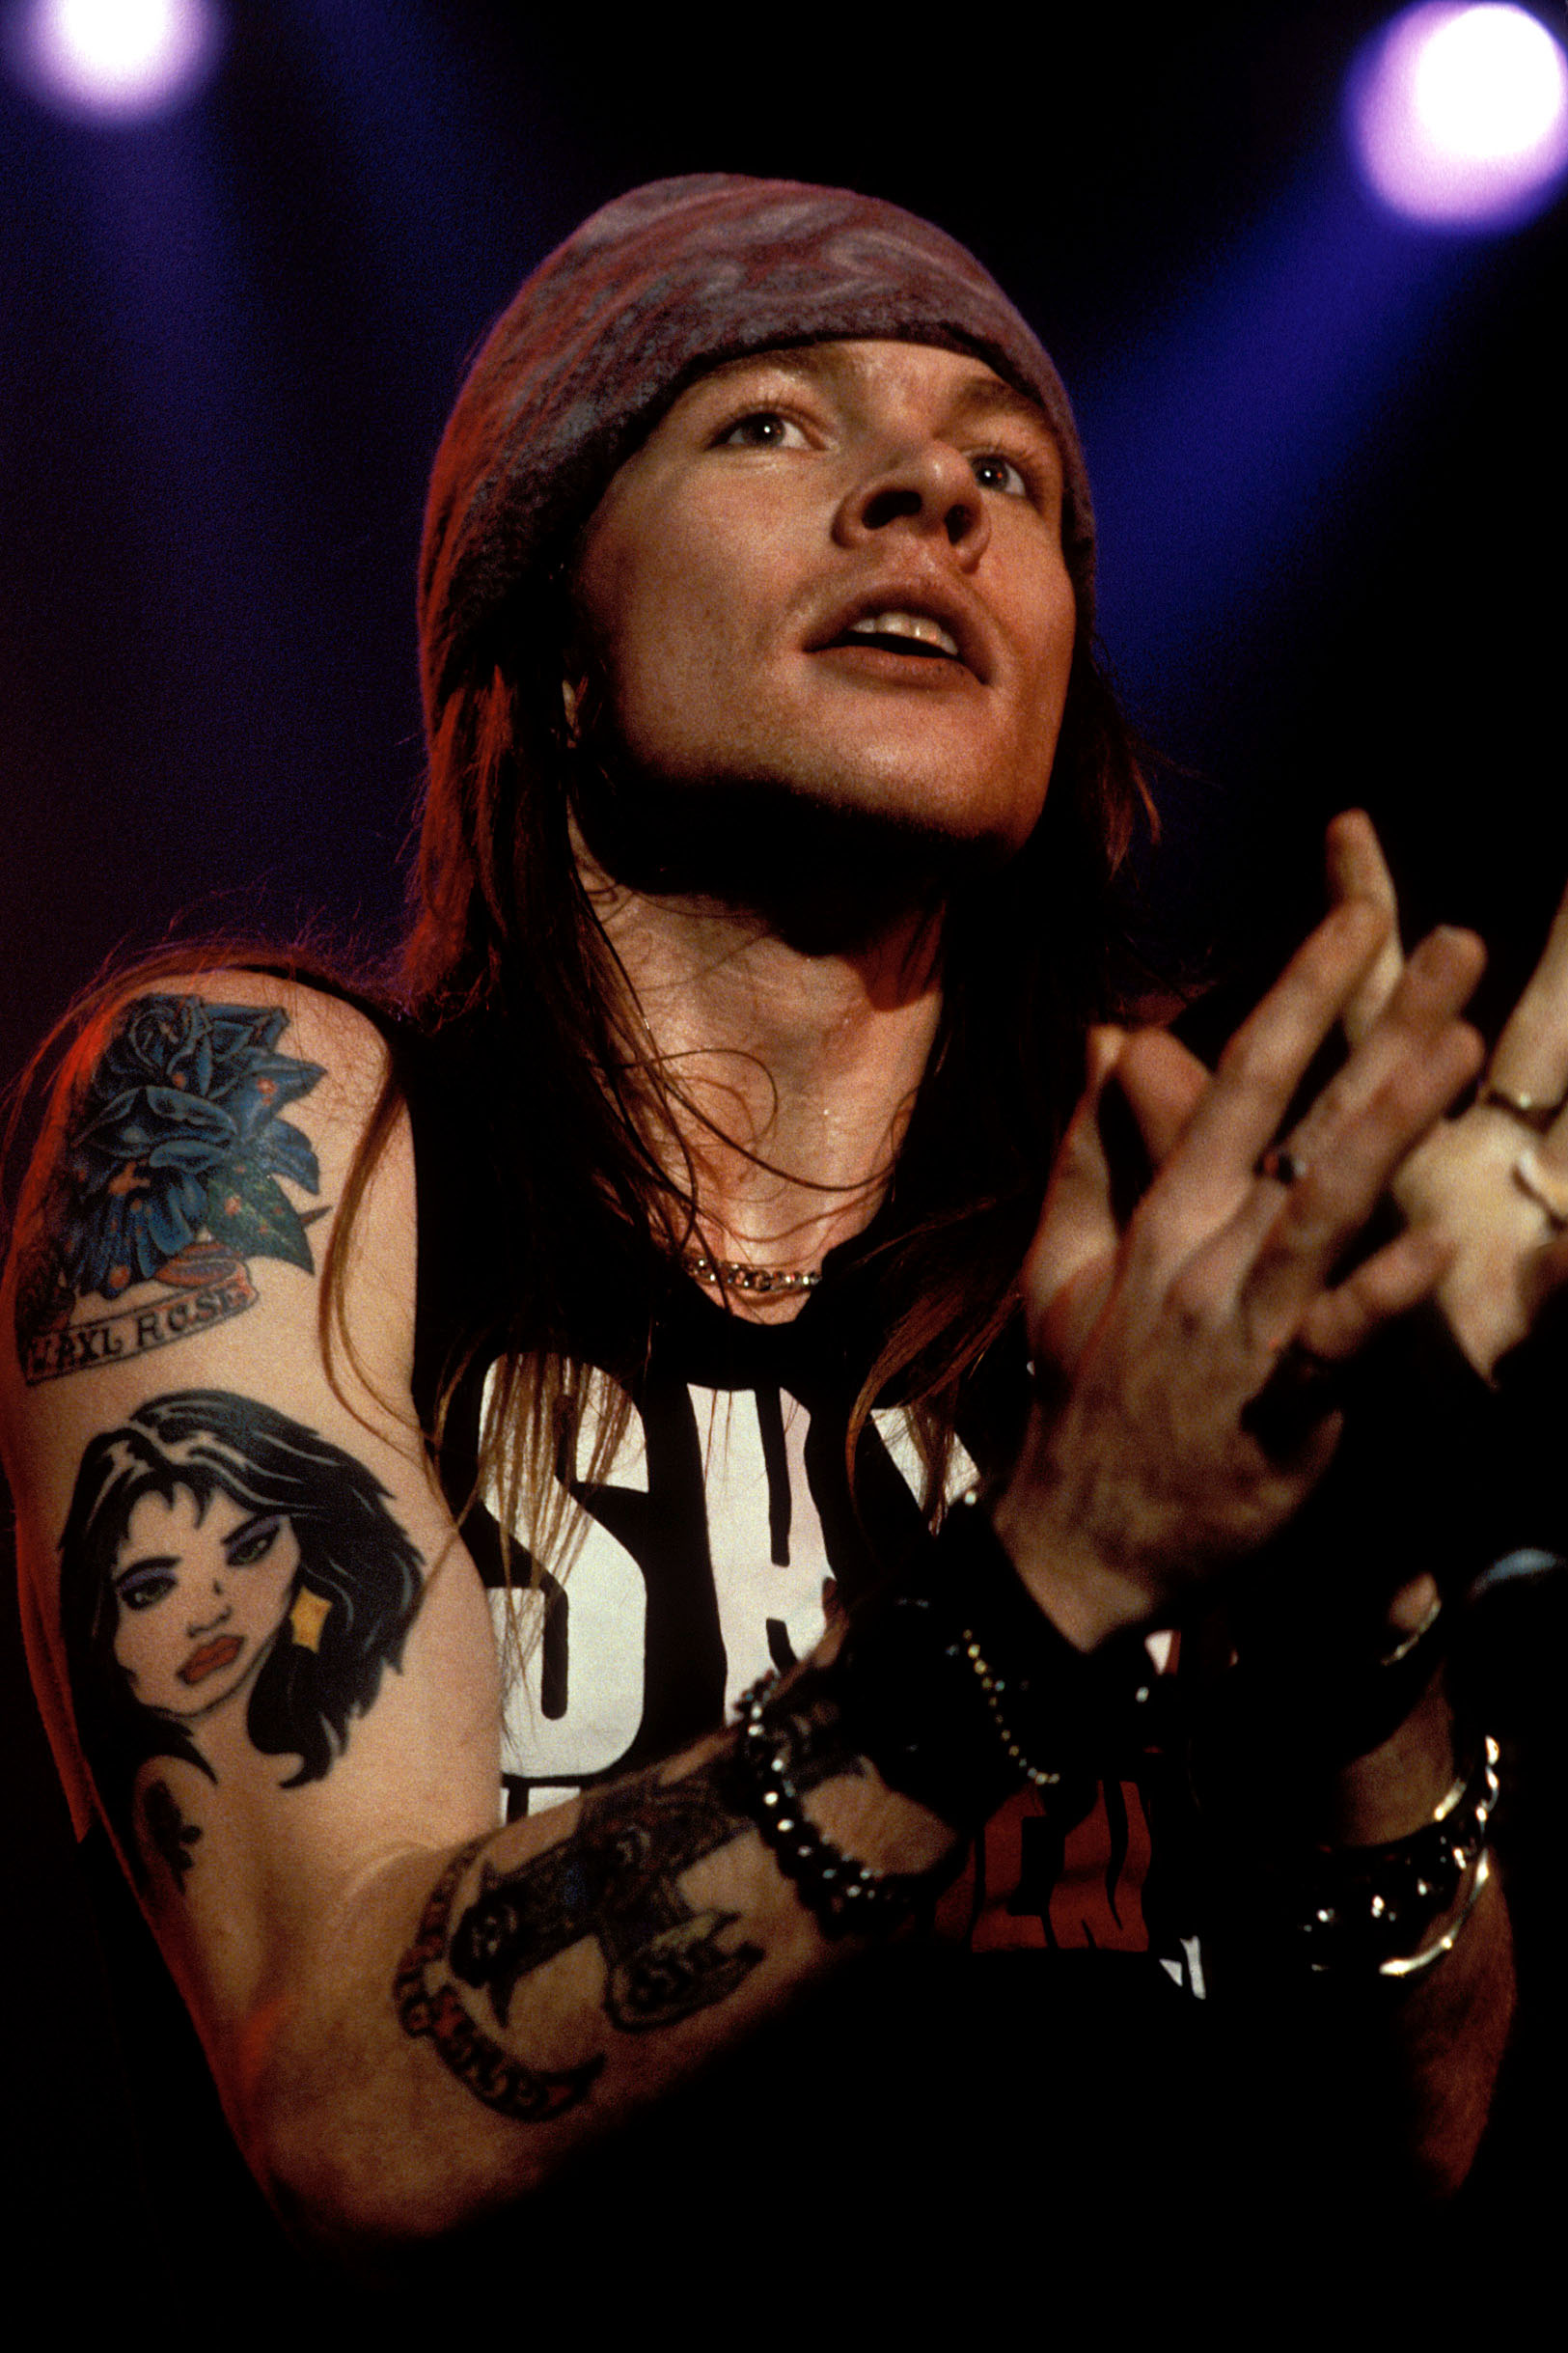 Axl Rose photo 26 of 37 pics, wallpaper - photo #237510 - ThePlace2